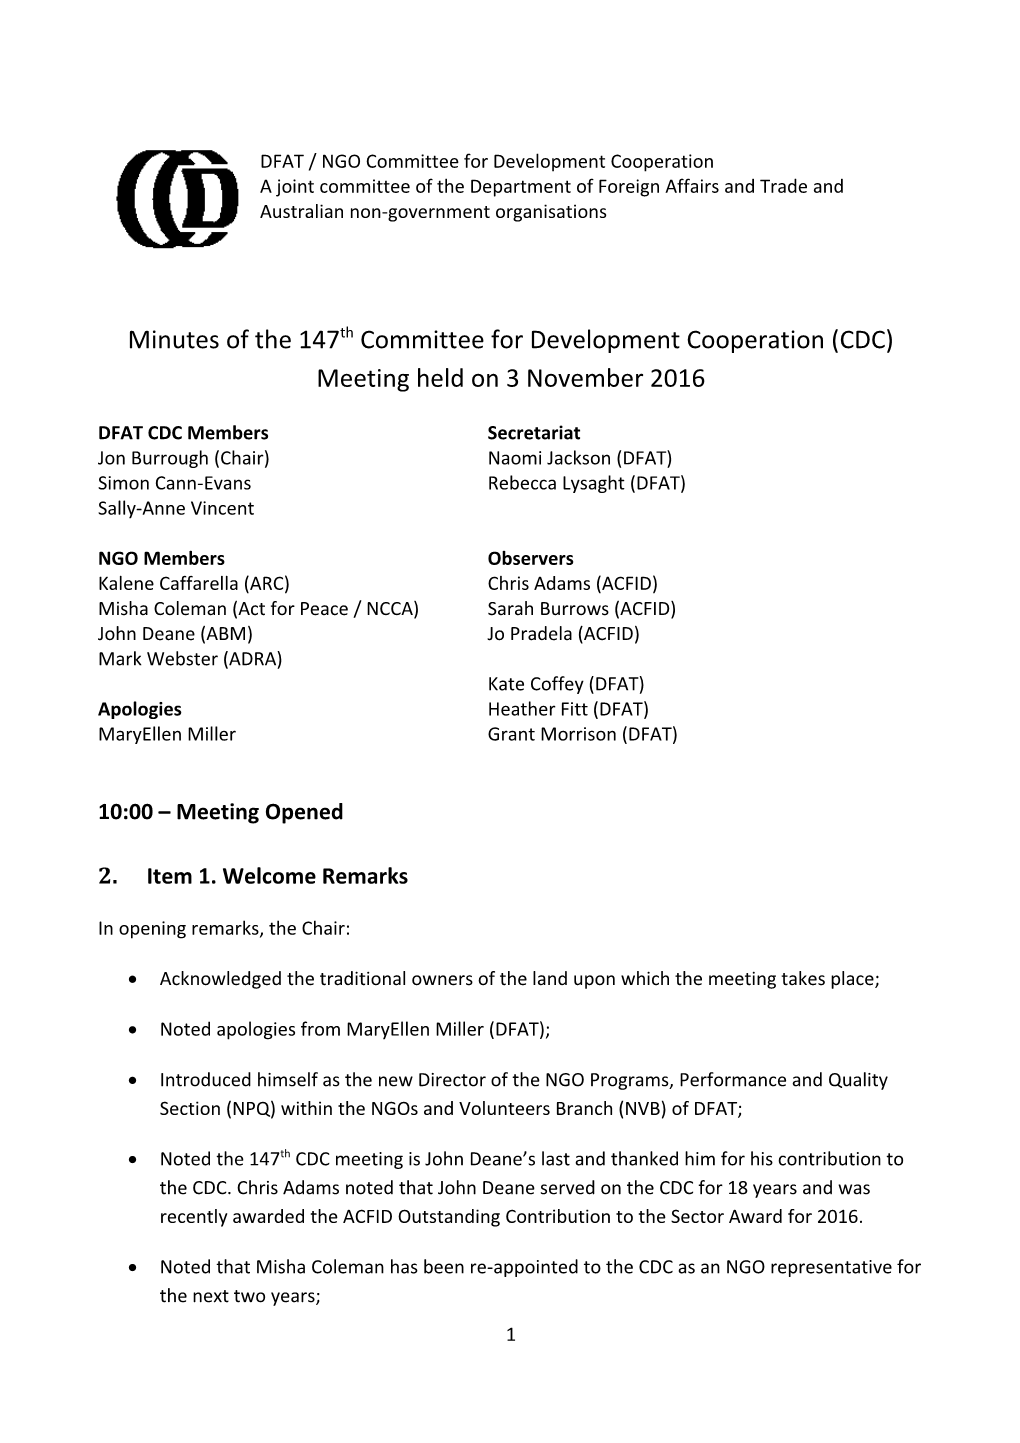 Minutes of the 147Th Committee for Development Cooperation (CDC) Meeting Held on 3 November 2016